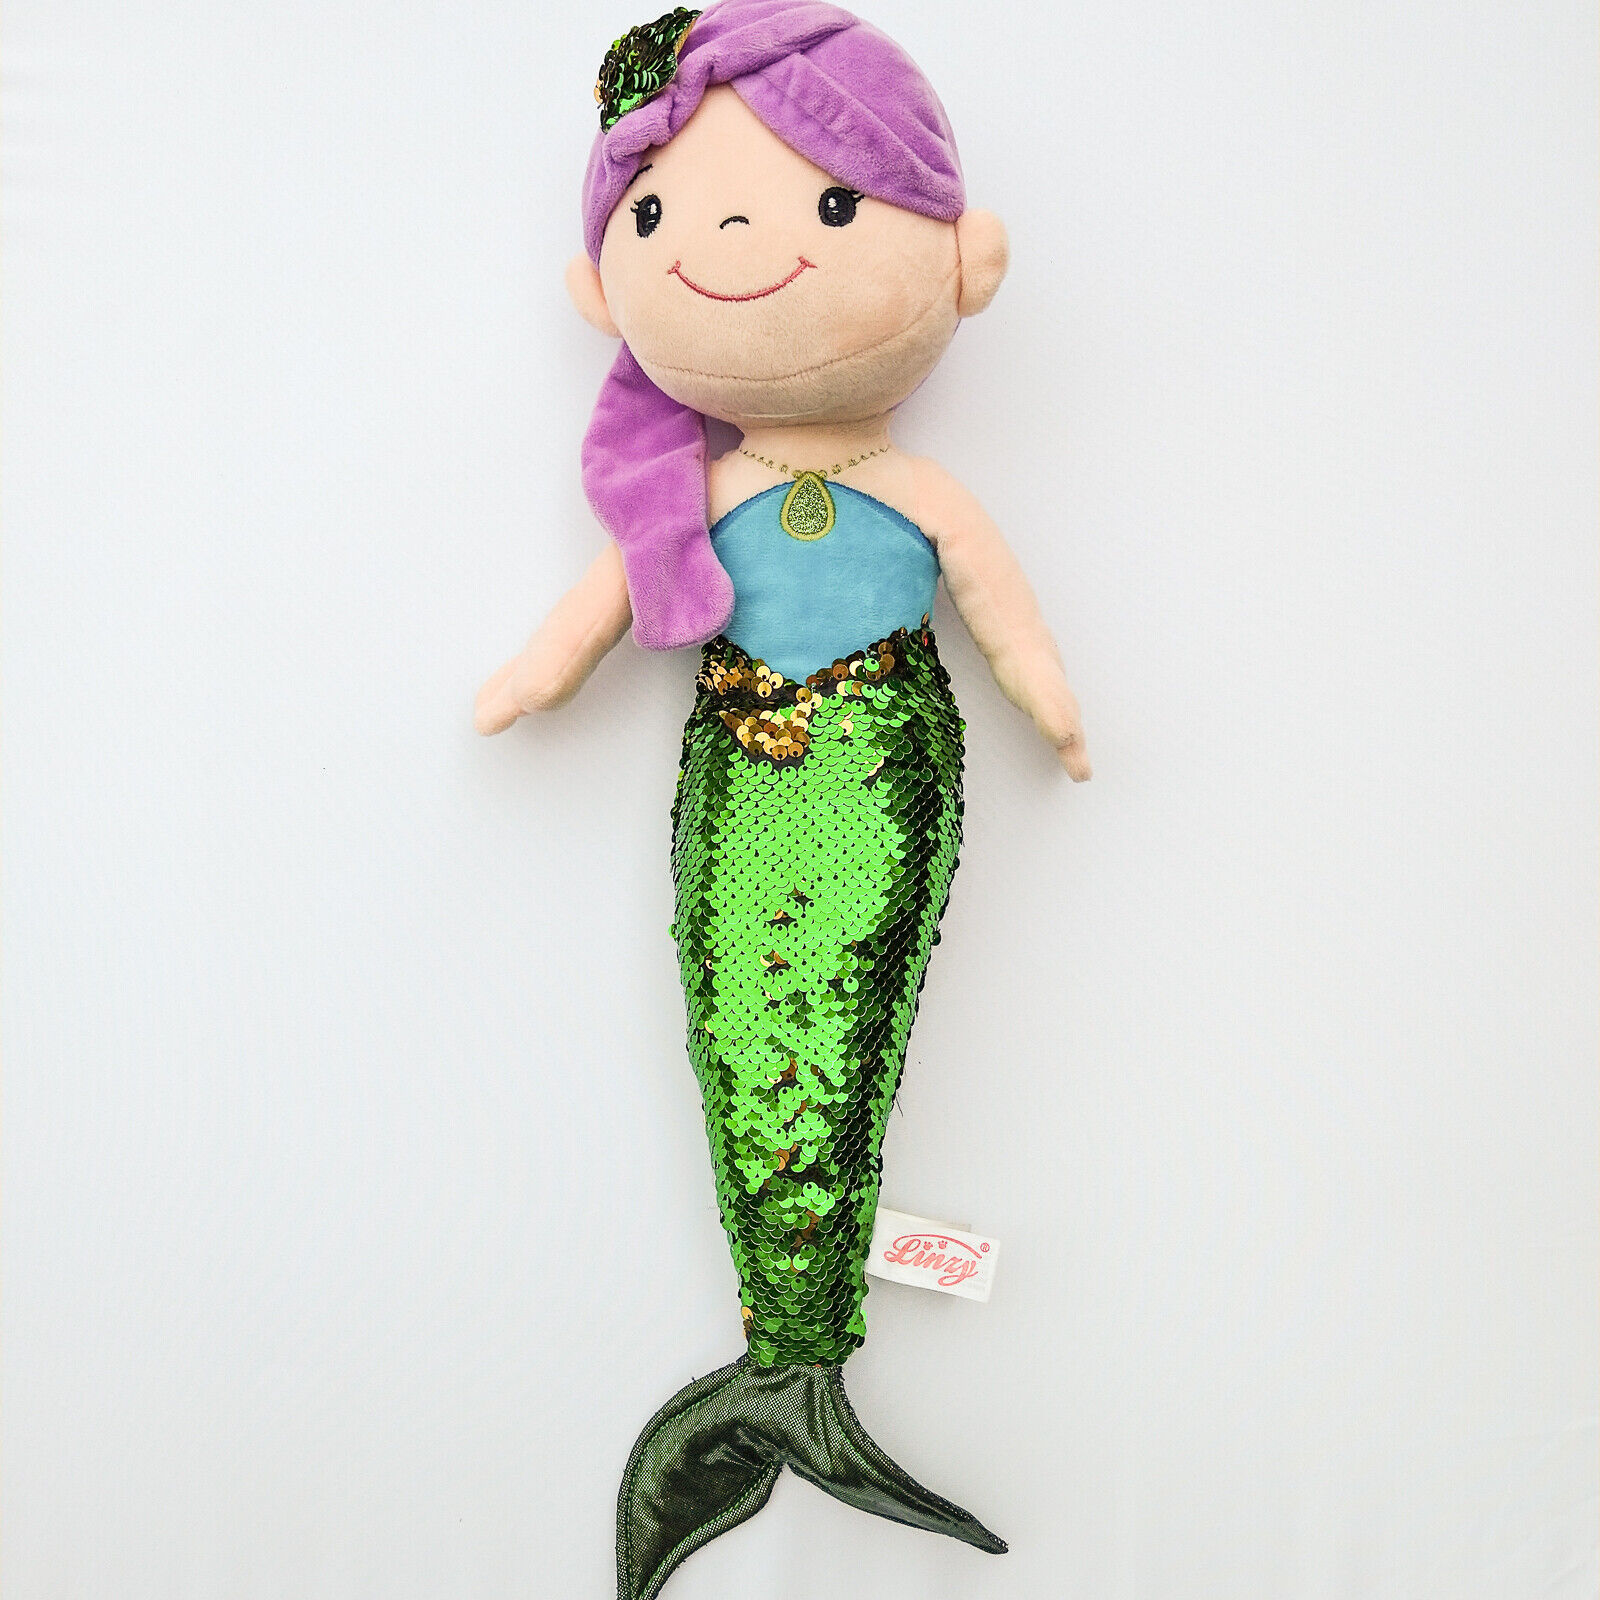 LINZY Mermaid Plush She has purple hair, a blue top and green colored  sequin | eBay